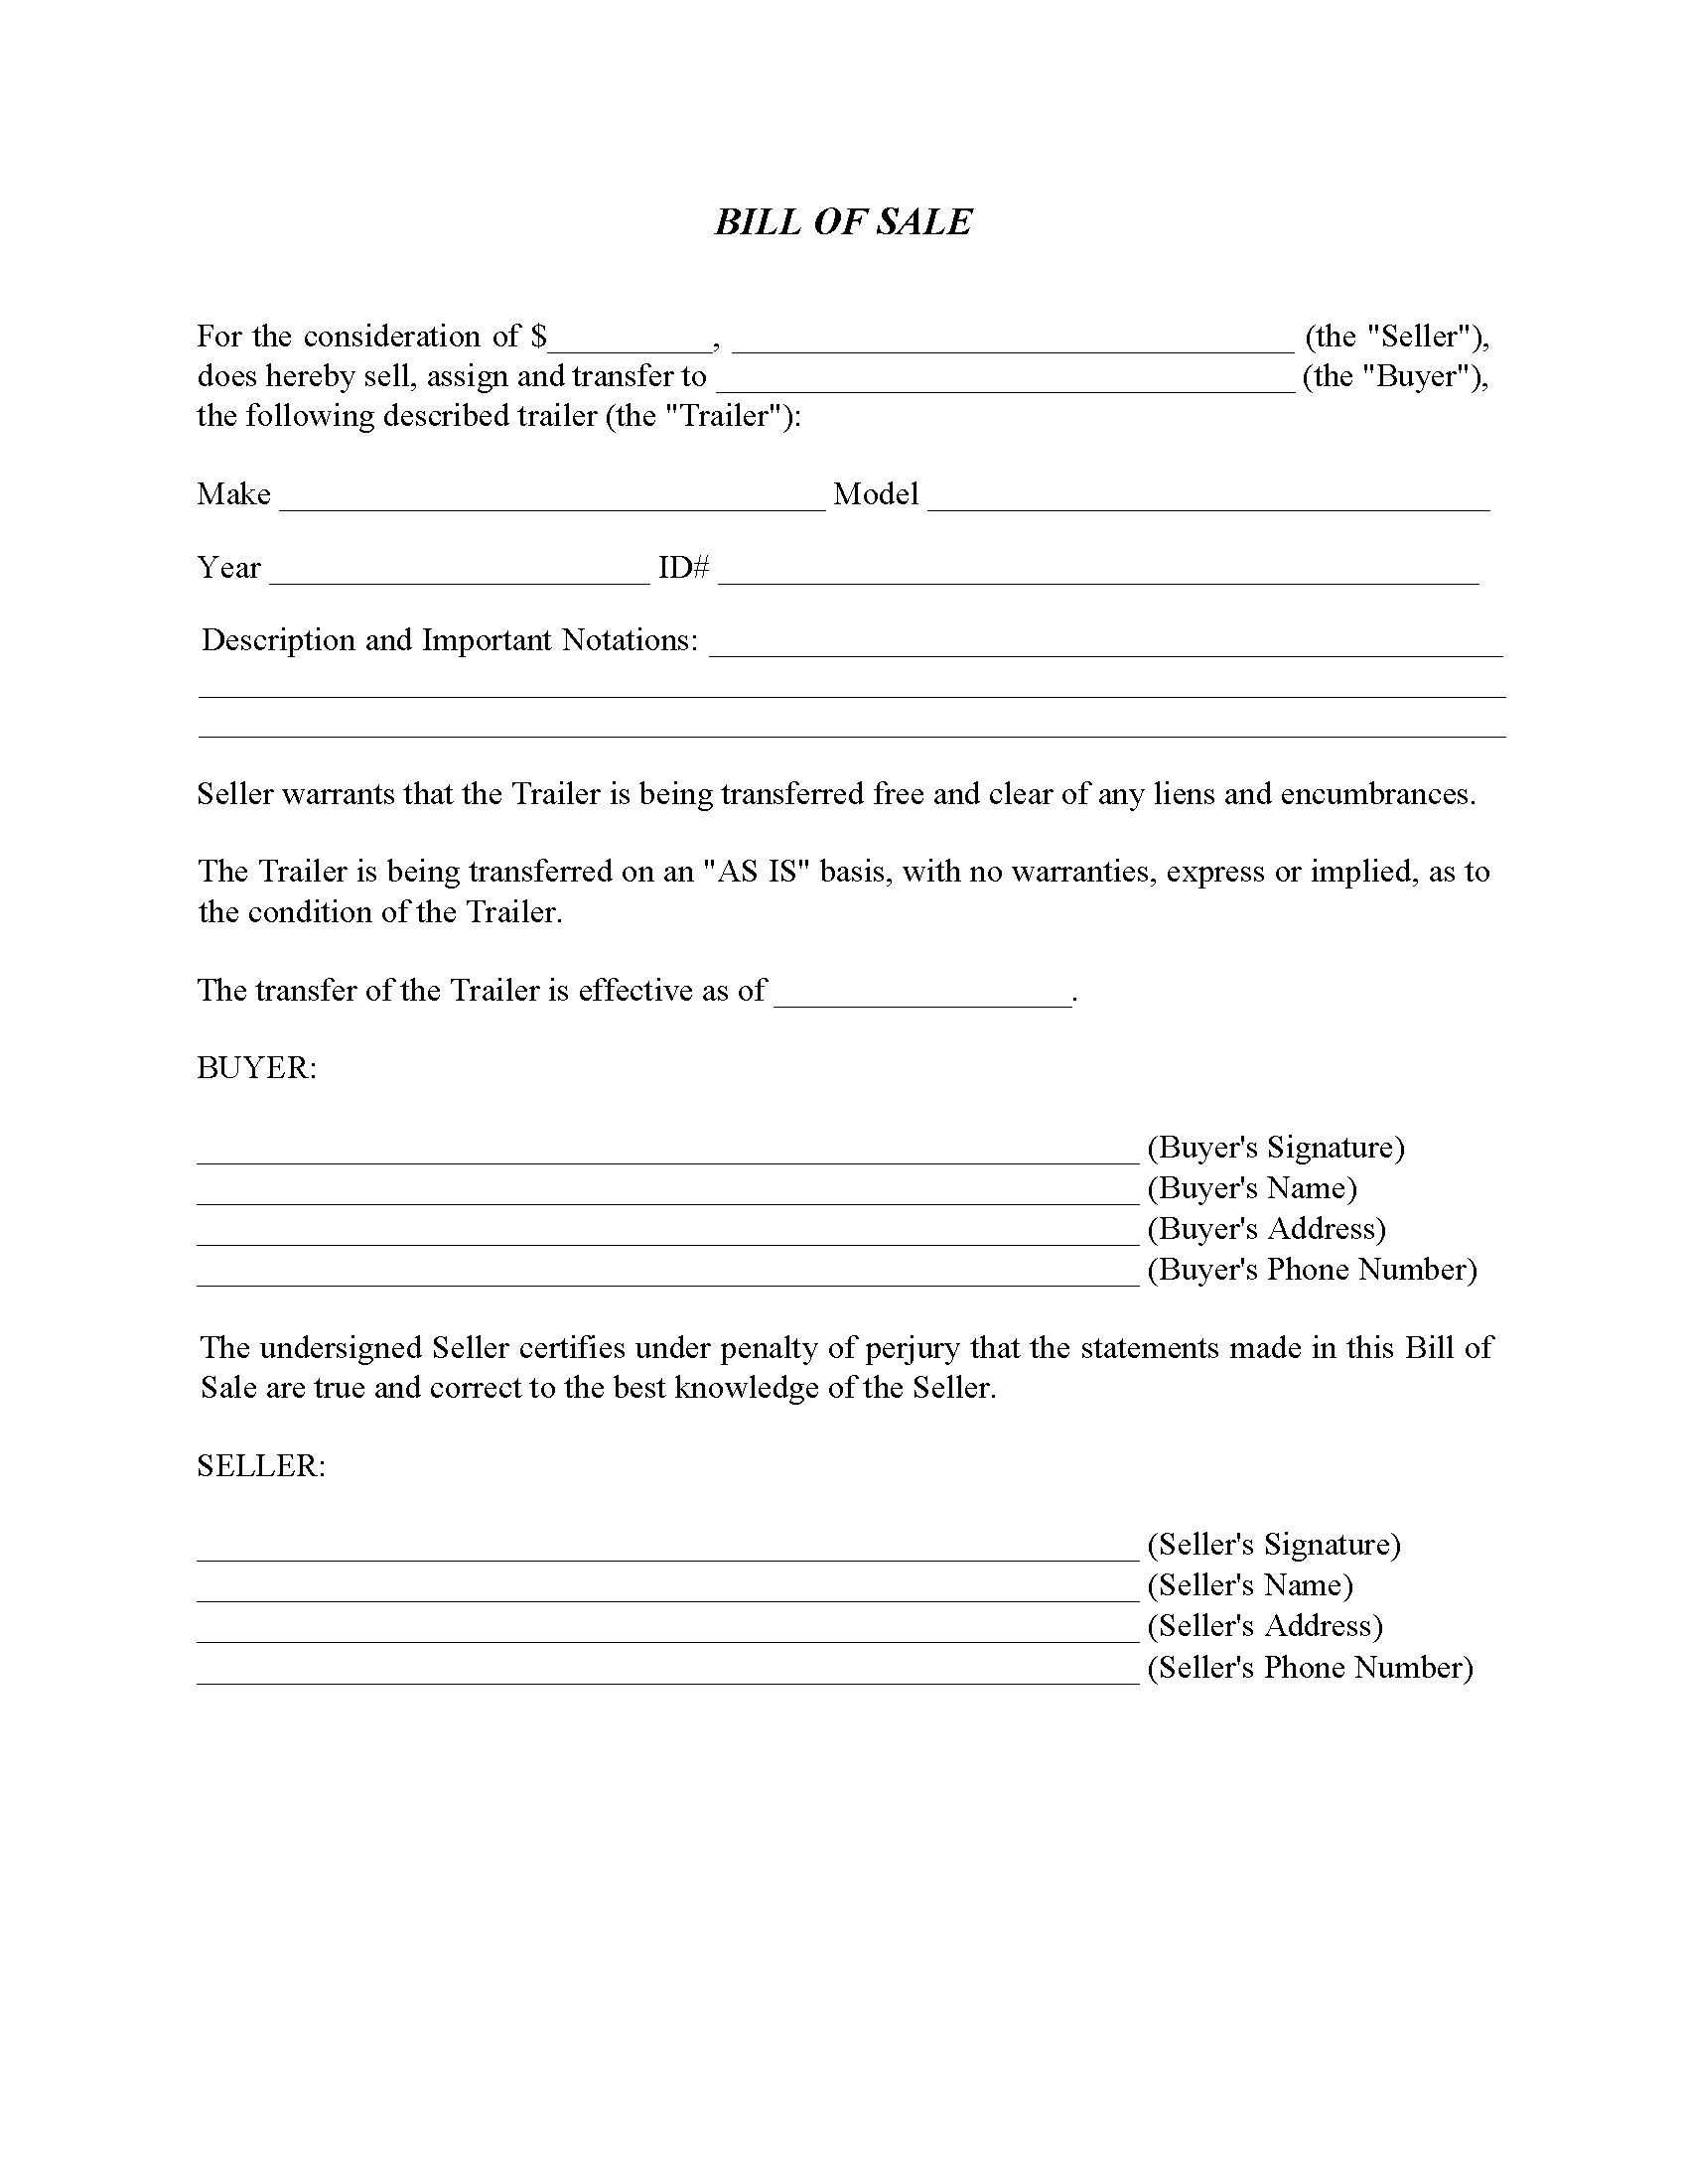 does-a-bill-of-sale-have-to-be-notarized-in-nc-richard-robie-s-template